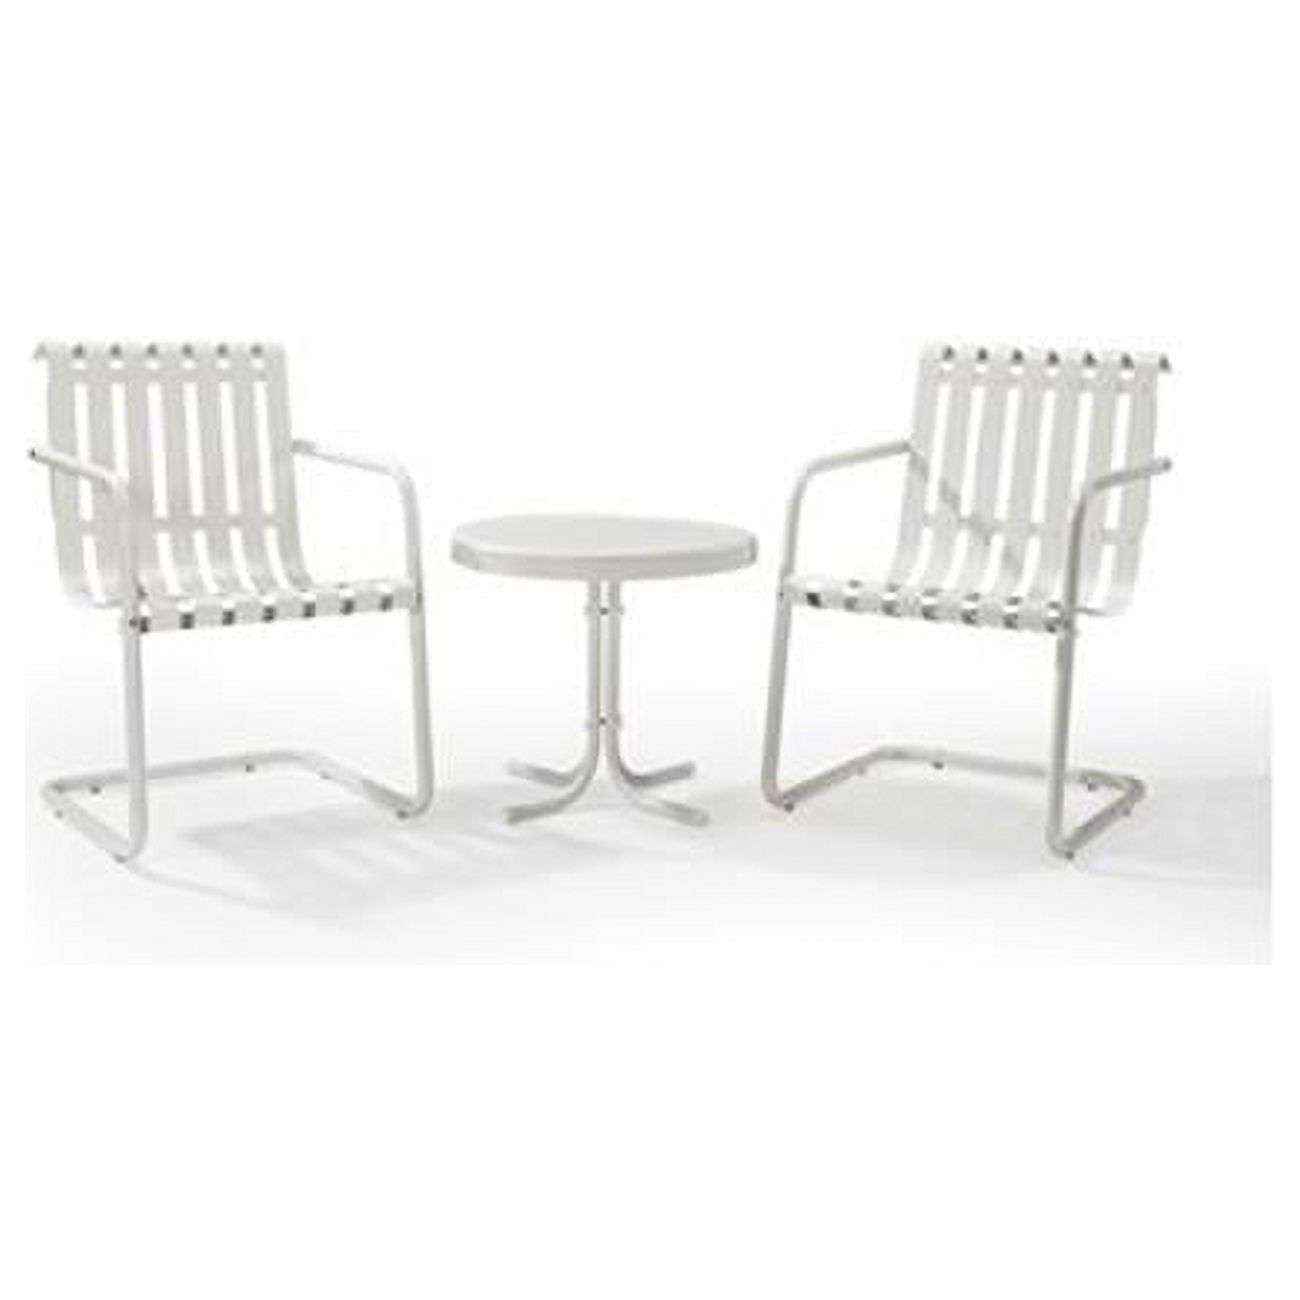 Gracie 3 Piece Metal Outdoor Conversation Seating Set - 2 Chairs and Side Table in Alabaster White - image 1 of 1